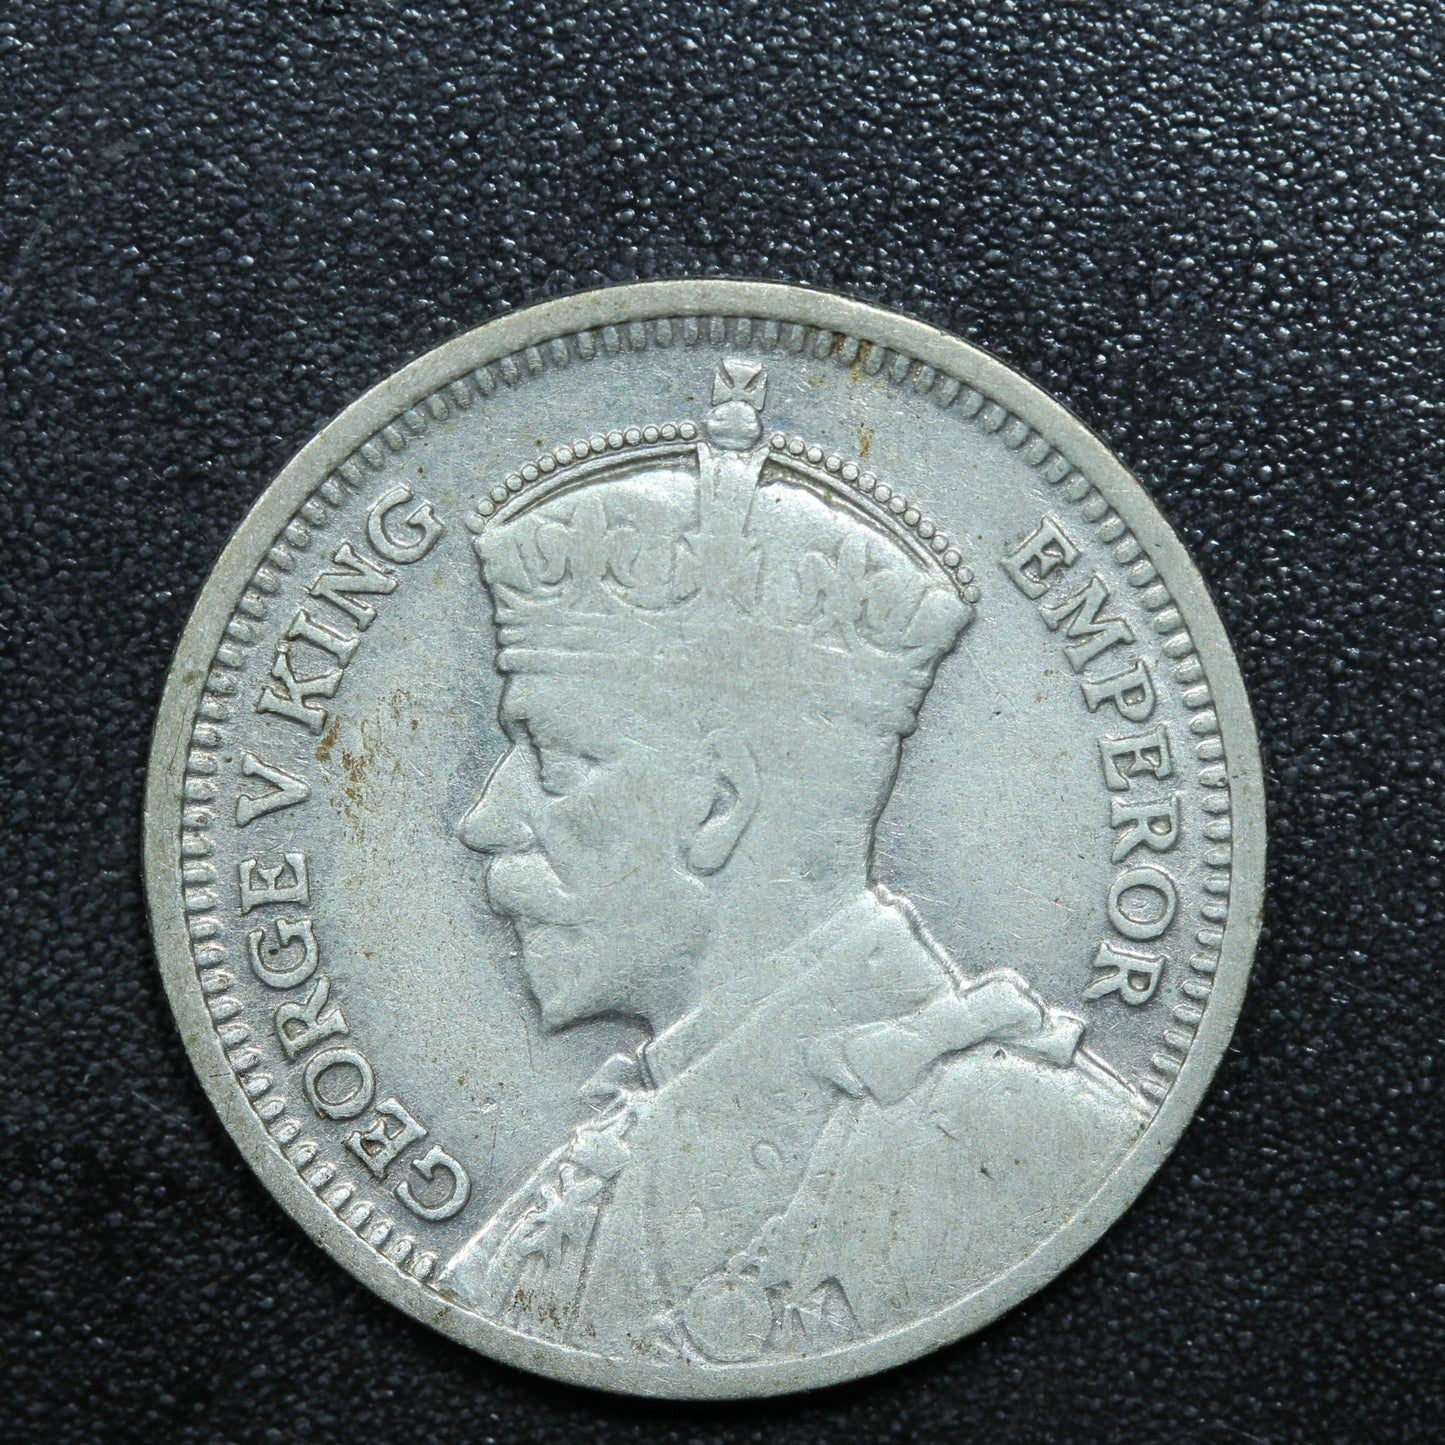 1933 New Zealand NZ 3 Pence Silver Coin - KM# 1